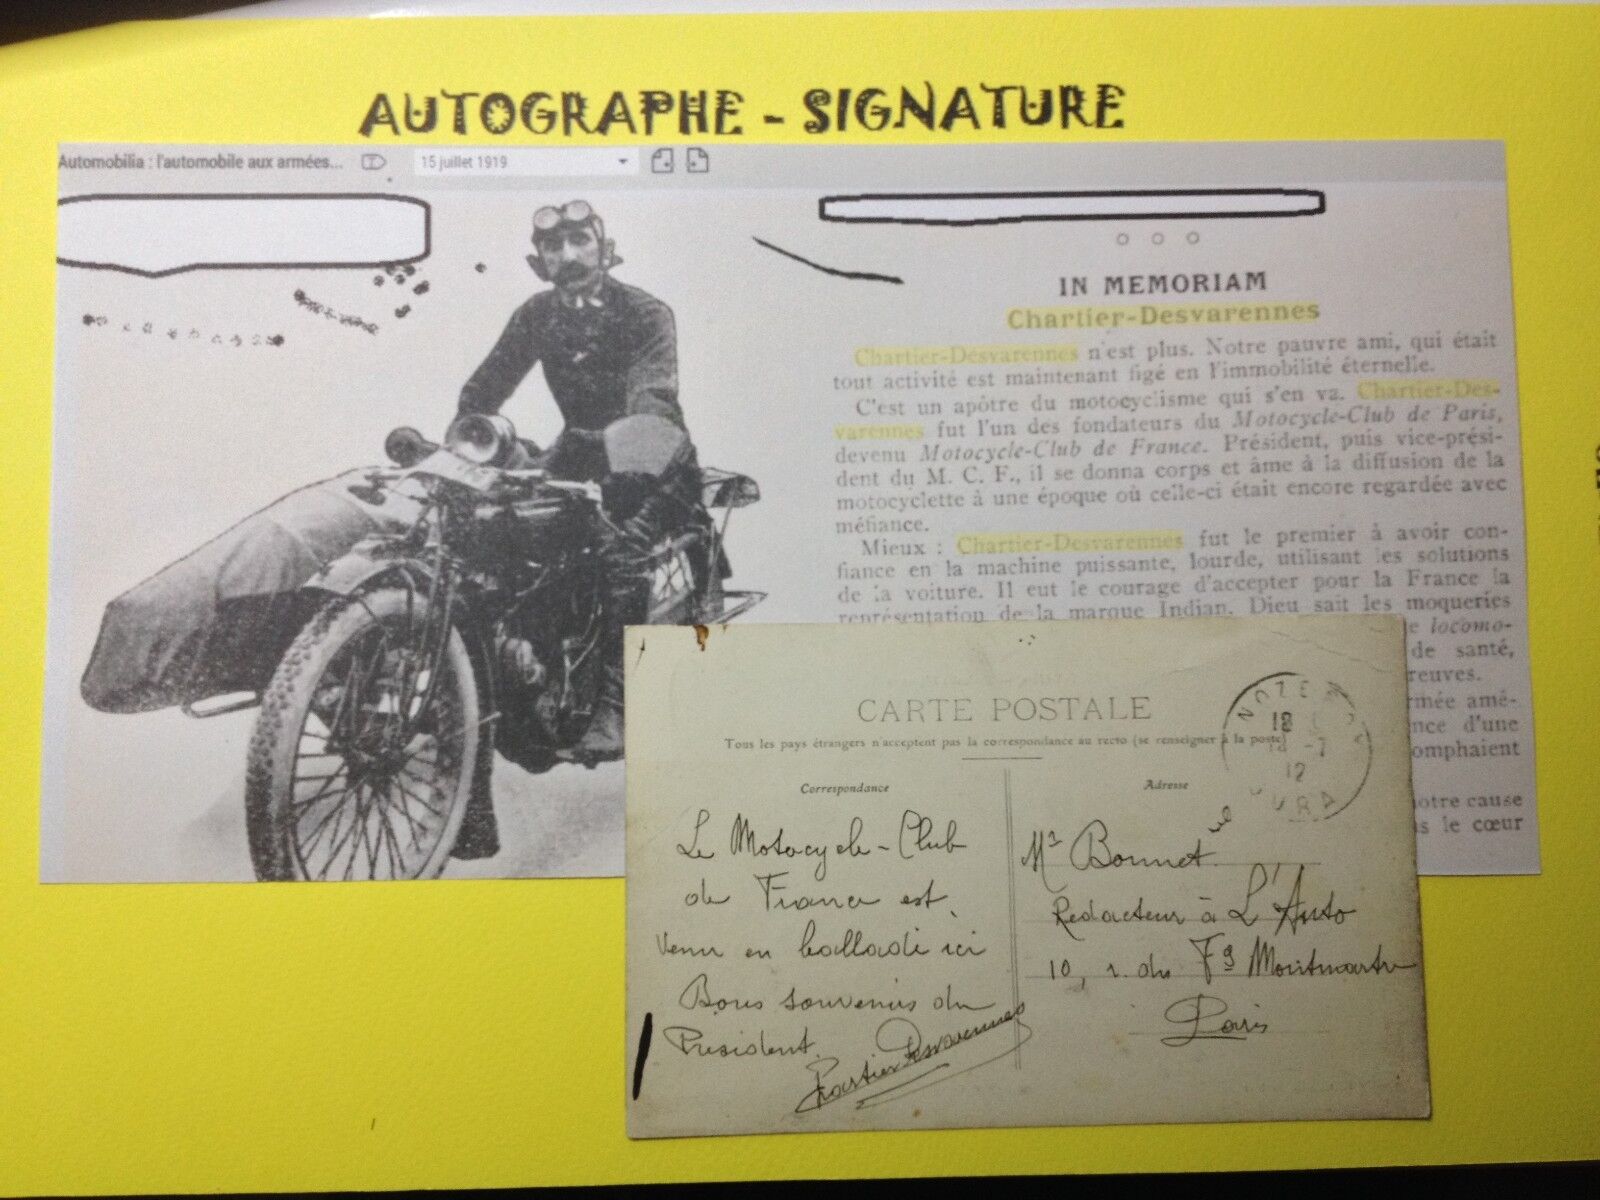 cpa RARE Signed CHARTIER DESVARENNES President of the MCF MOTO to Mr BONNET Editor